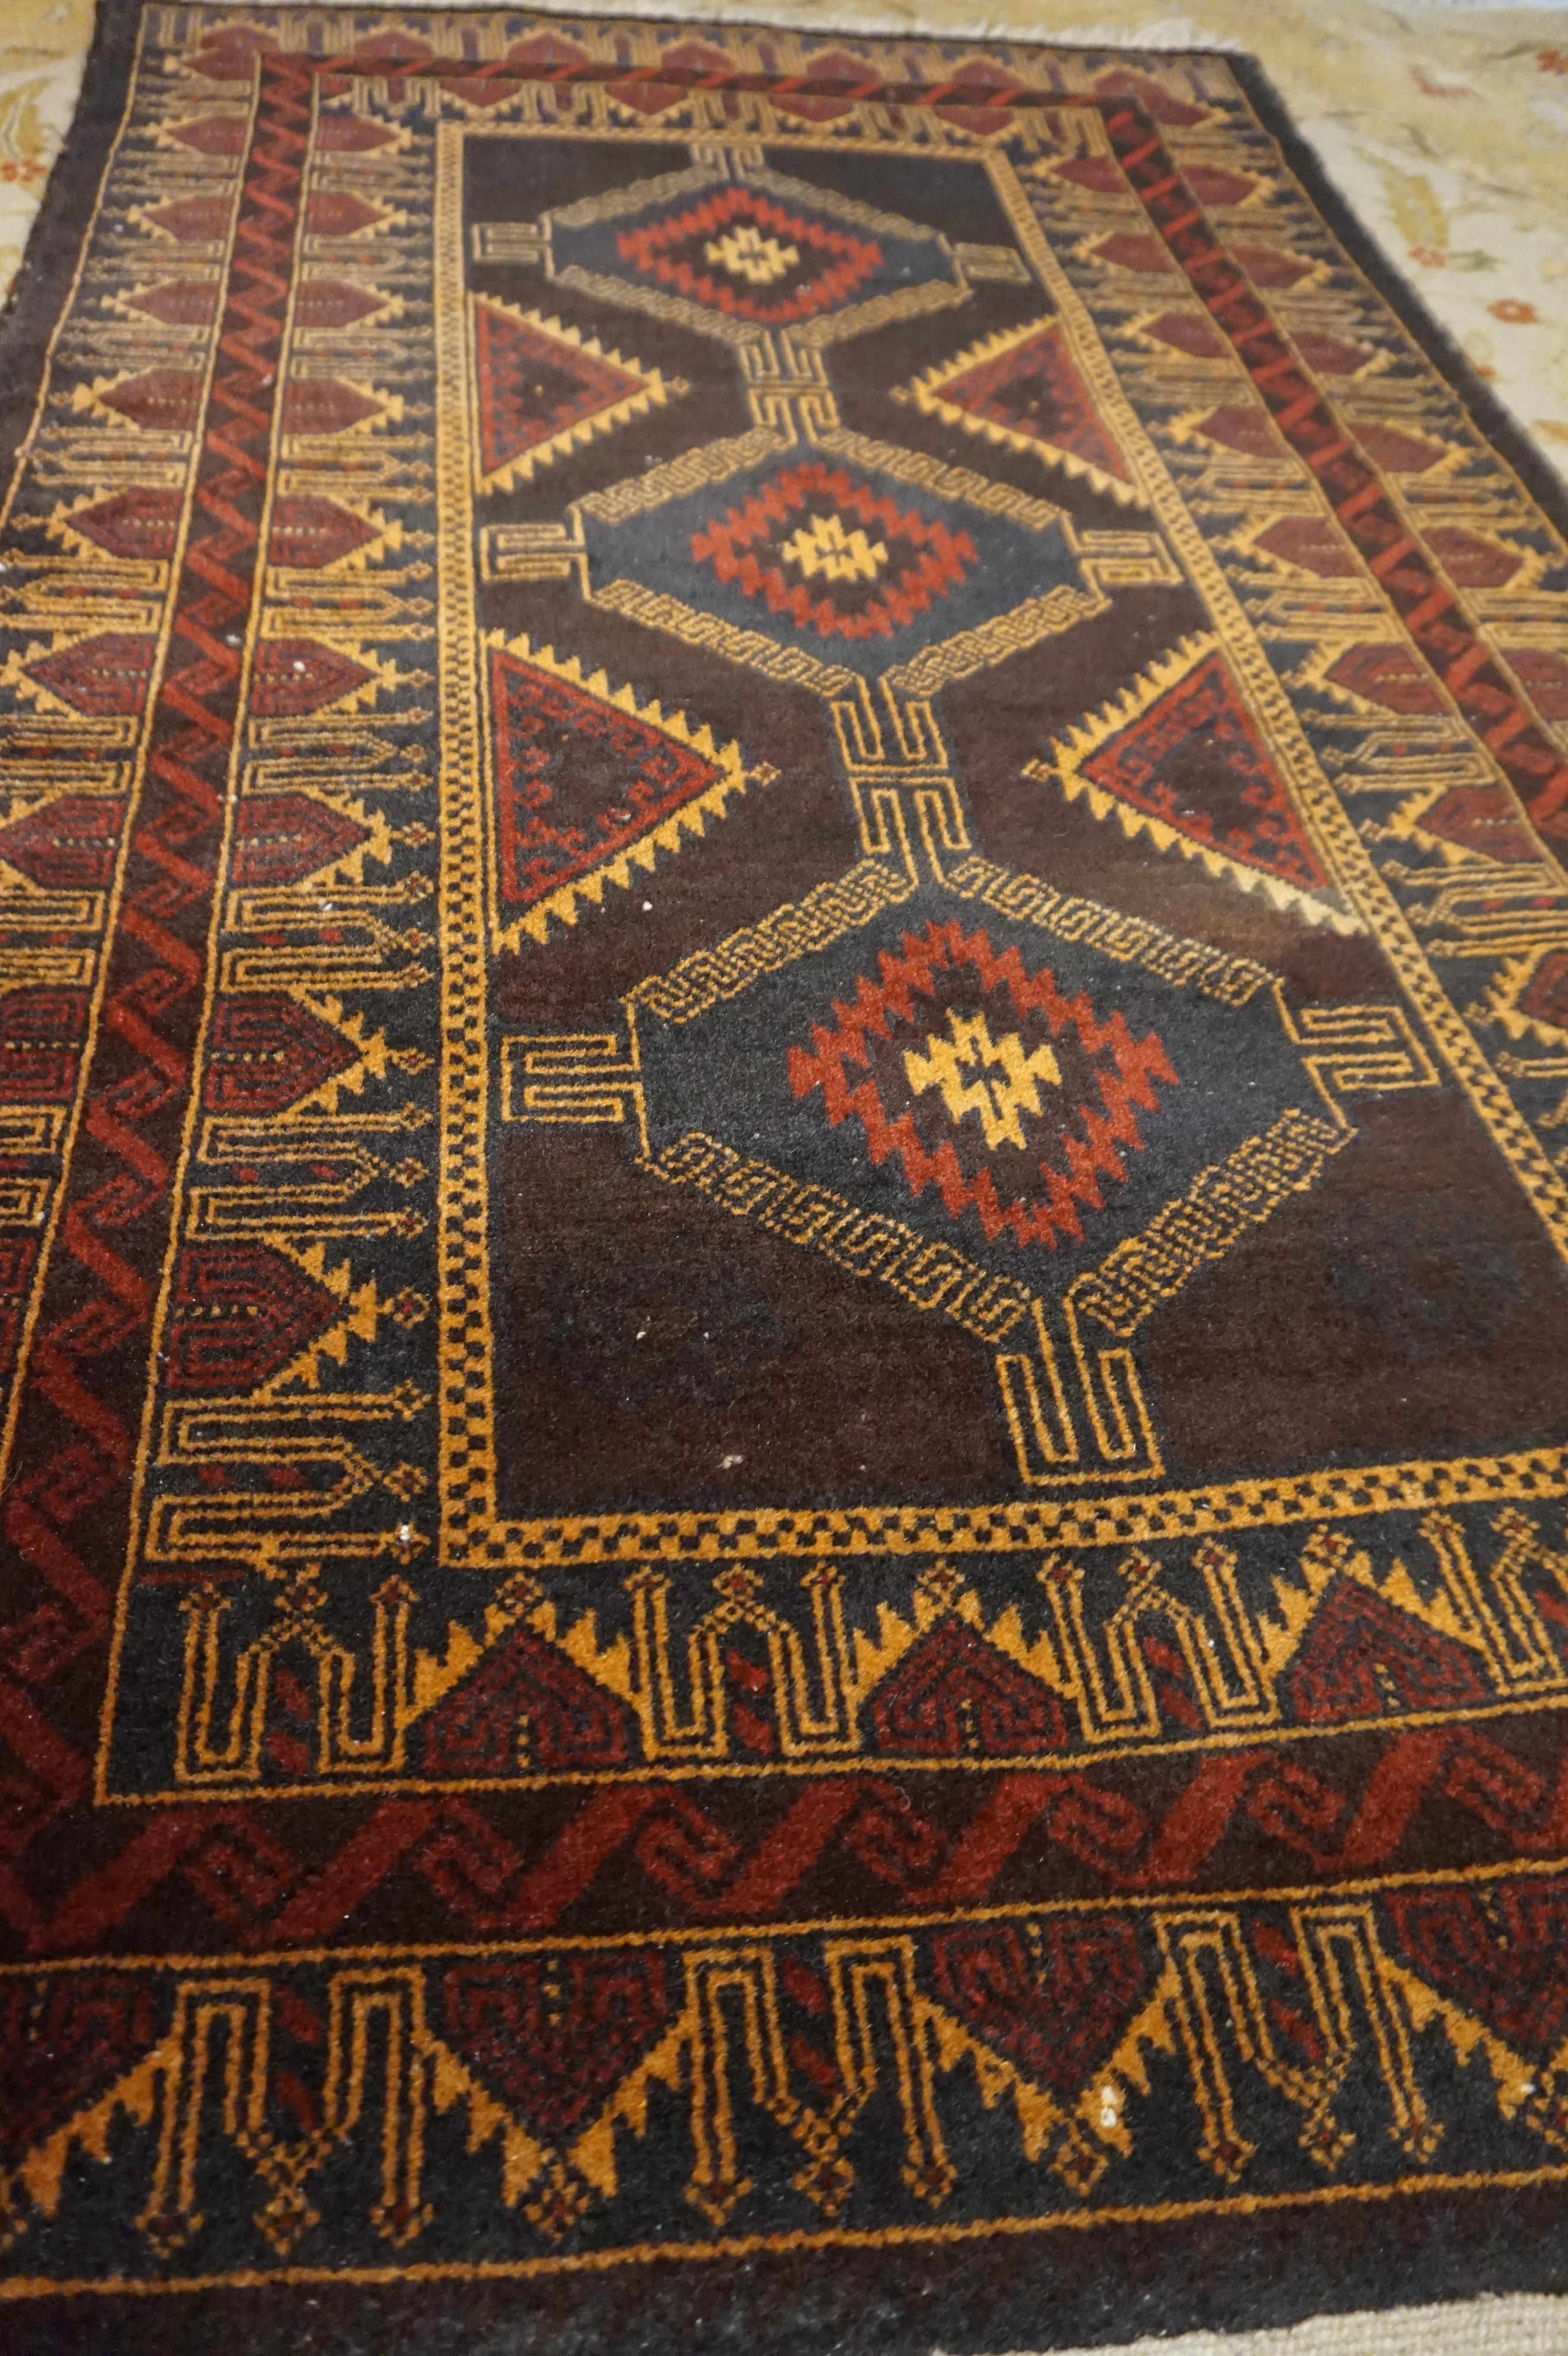 Finely hand knotted semi-antique Baluch rug woven in pure sheep wool and goat hair. Good overall condition with some wear around edges and tassels but the pile and colours are intact. Browns, rusts and mustards make this carpet unique and warm.